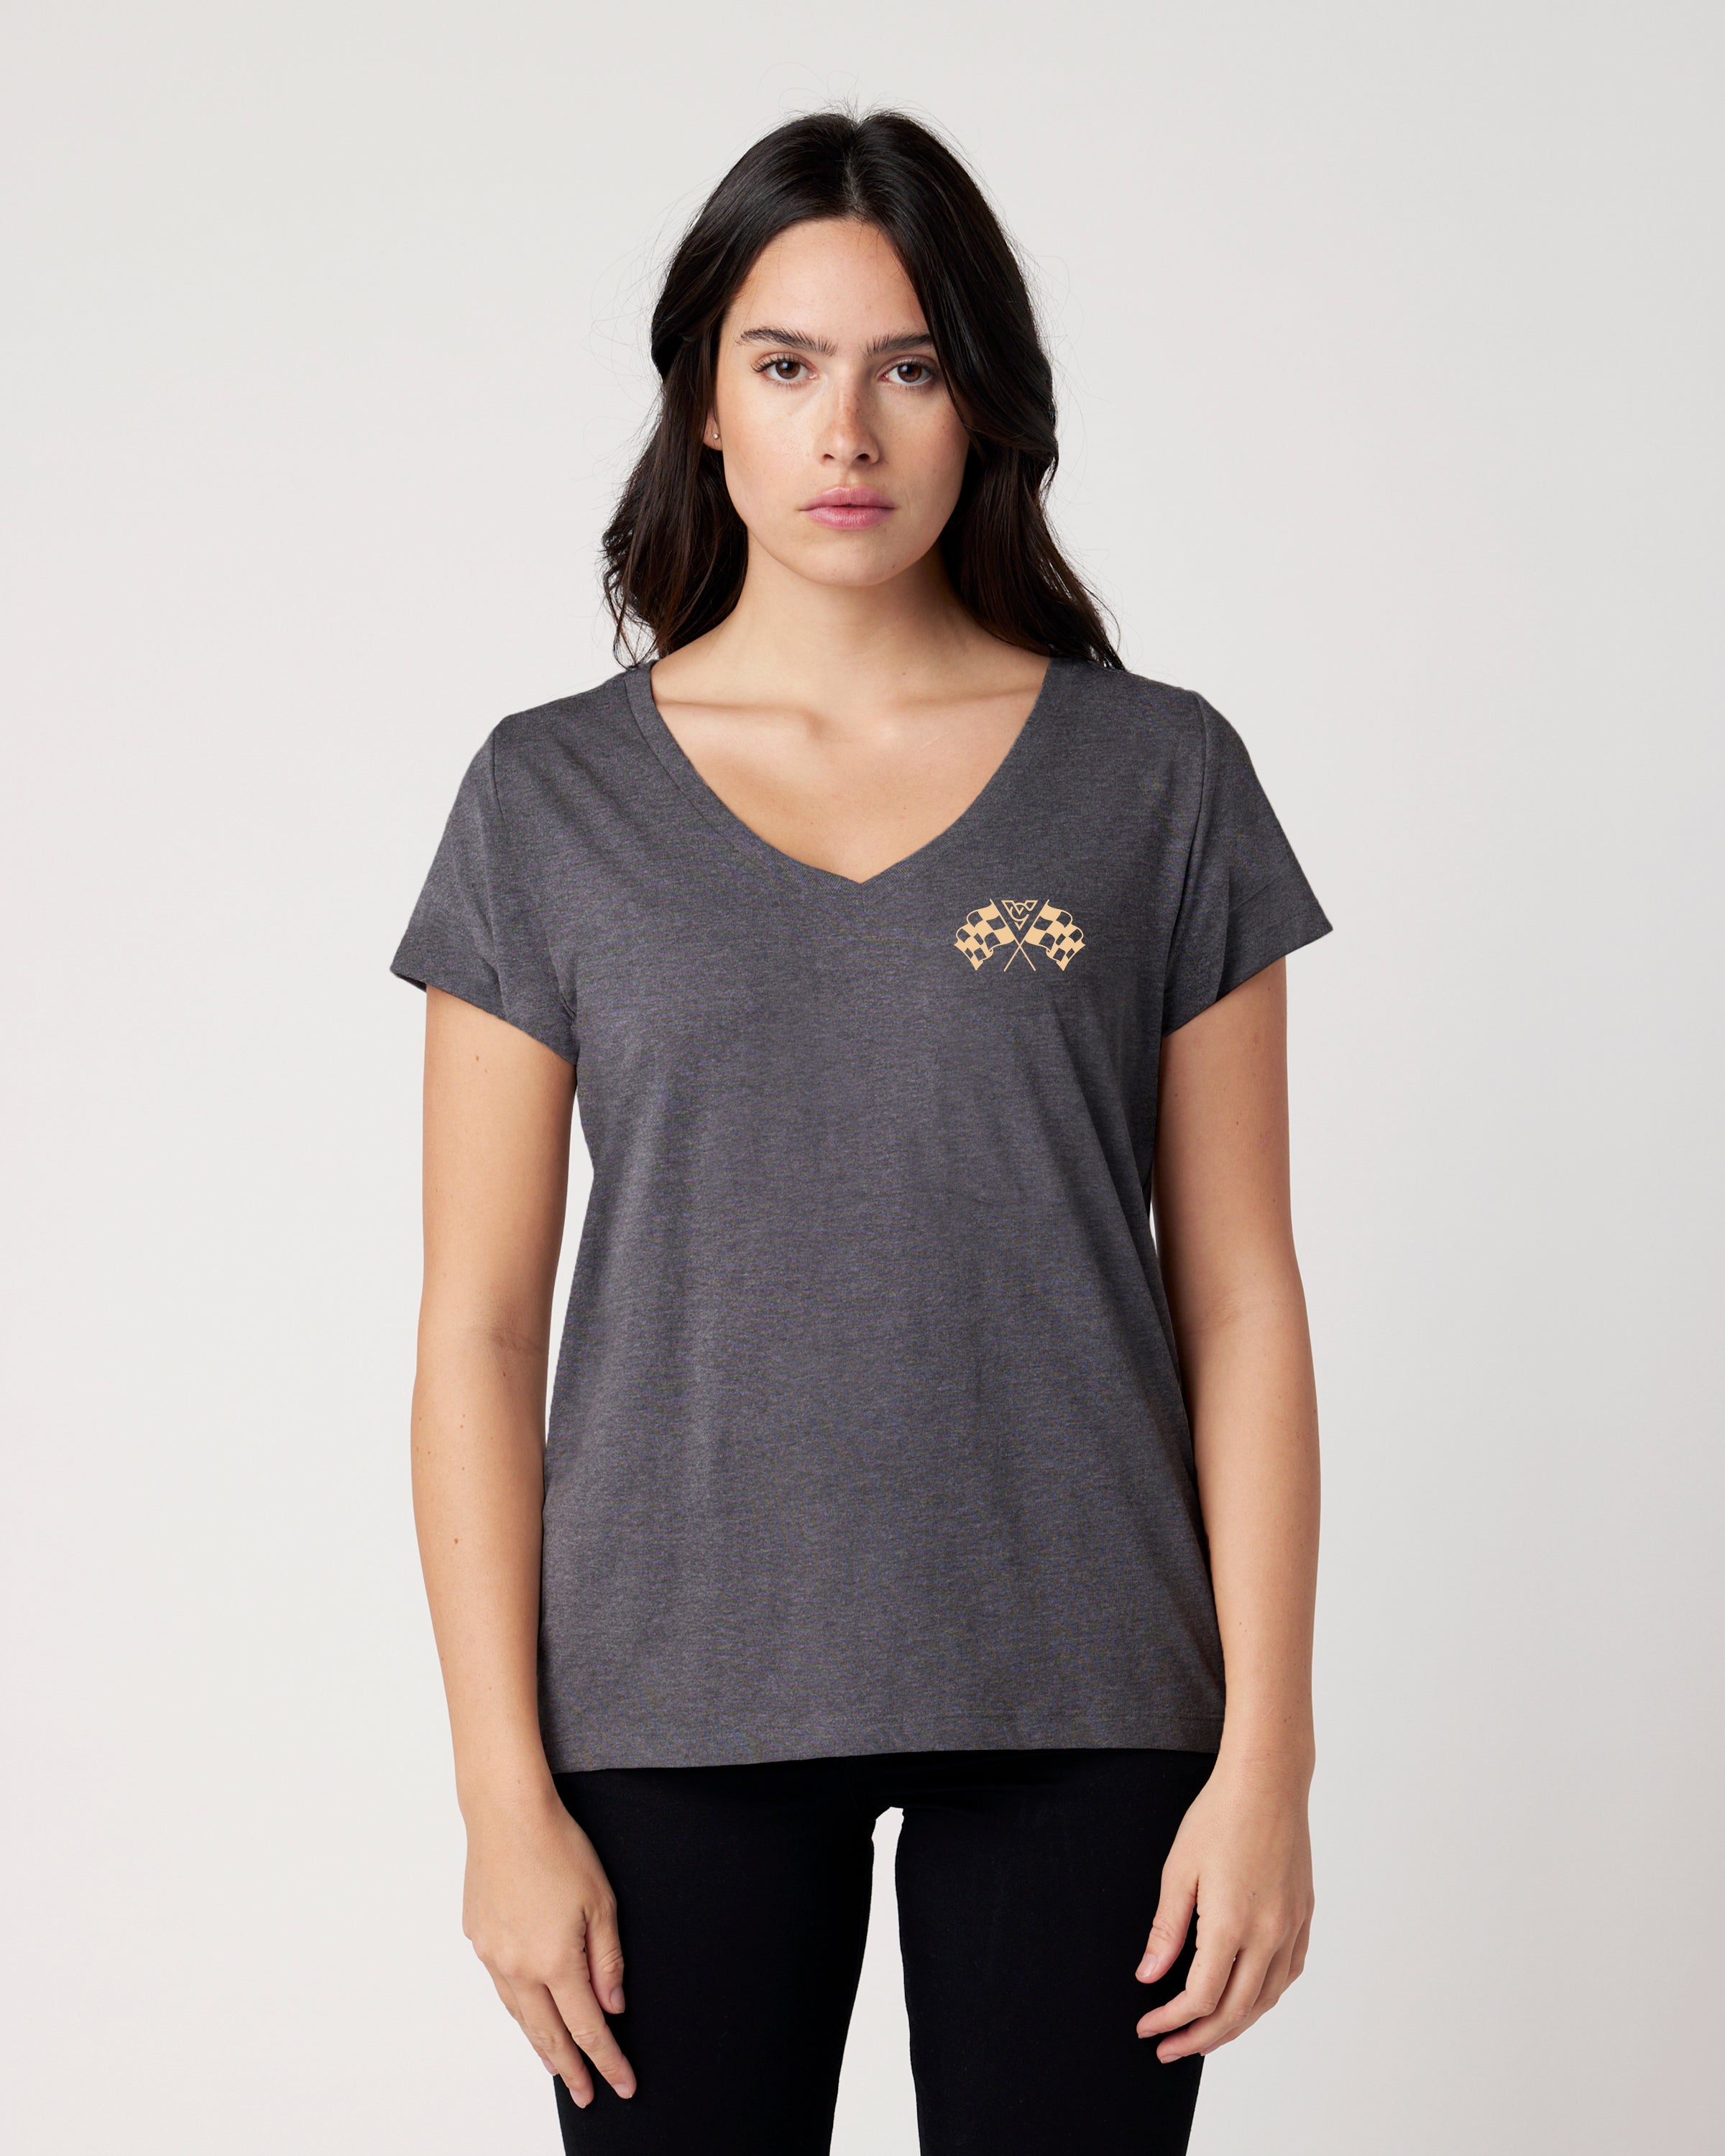 BOWTIE WOMENS V-NECK TEE (Charcoal Heather)